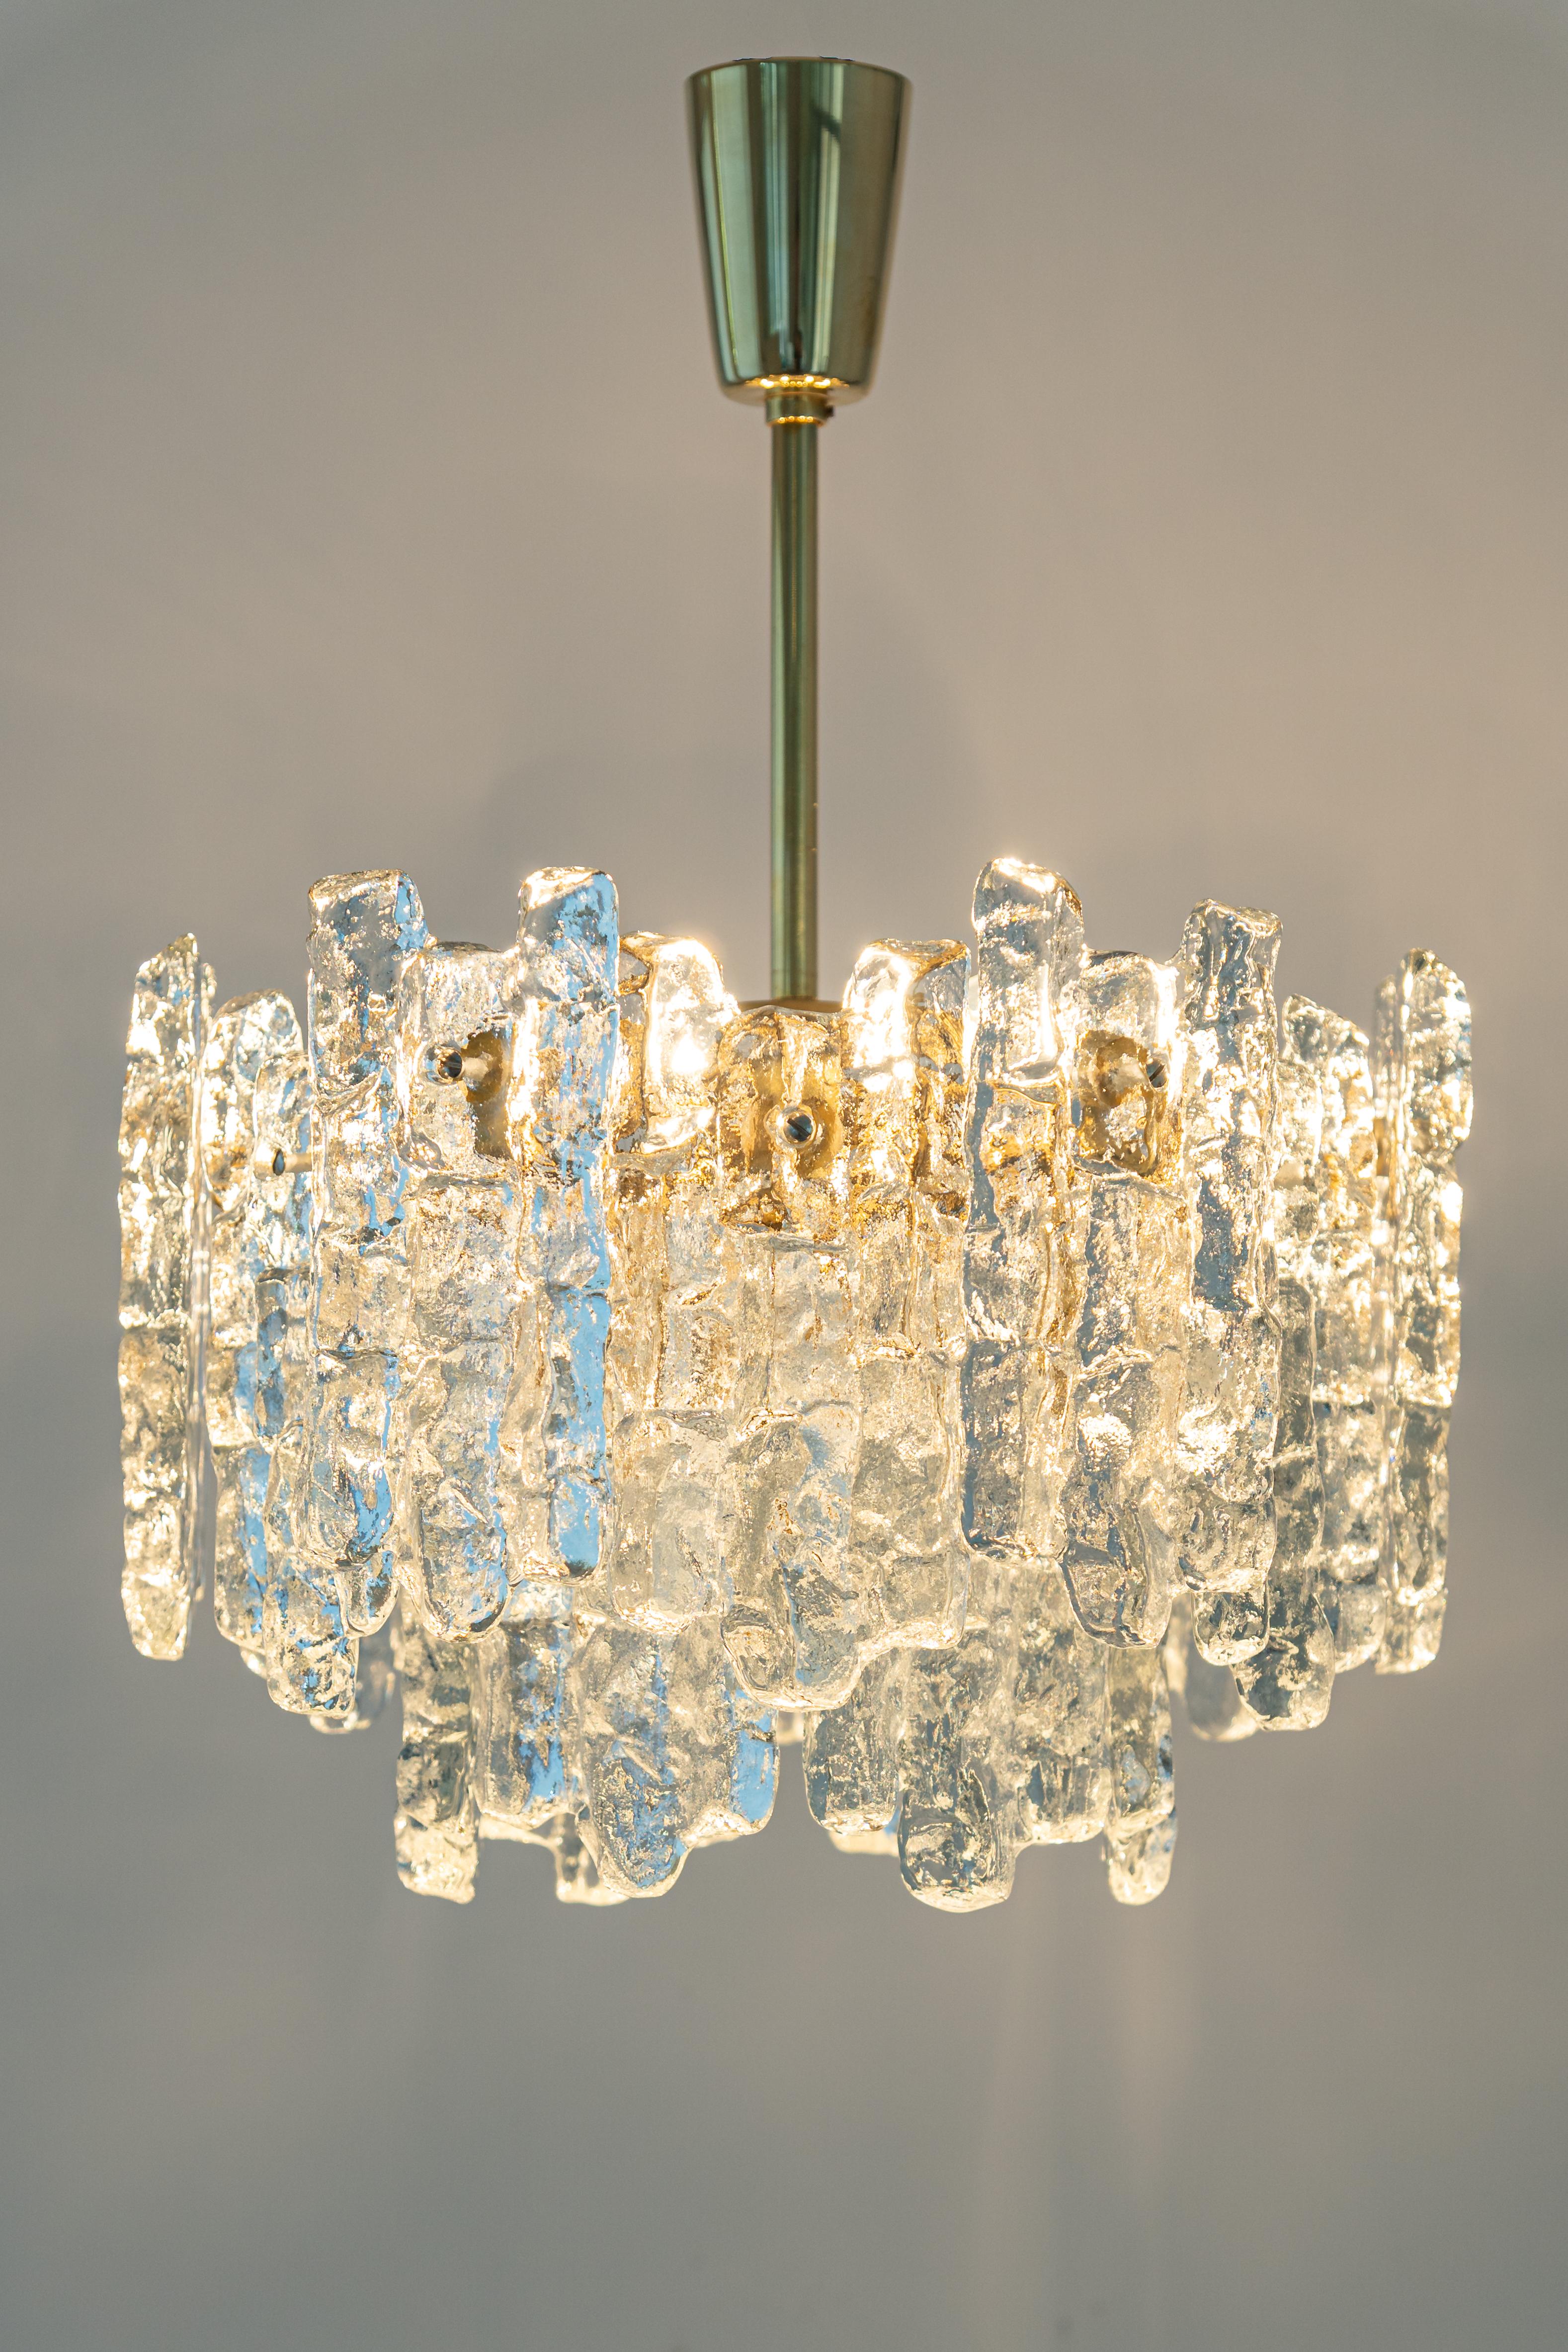 1 of 2 Large Murano Ice Glass Chandelier by Kalmar, Austria, 1960s For Sale 2